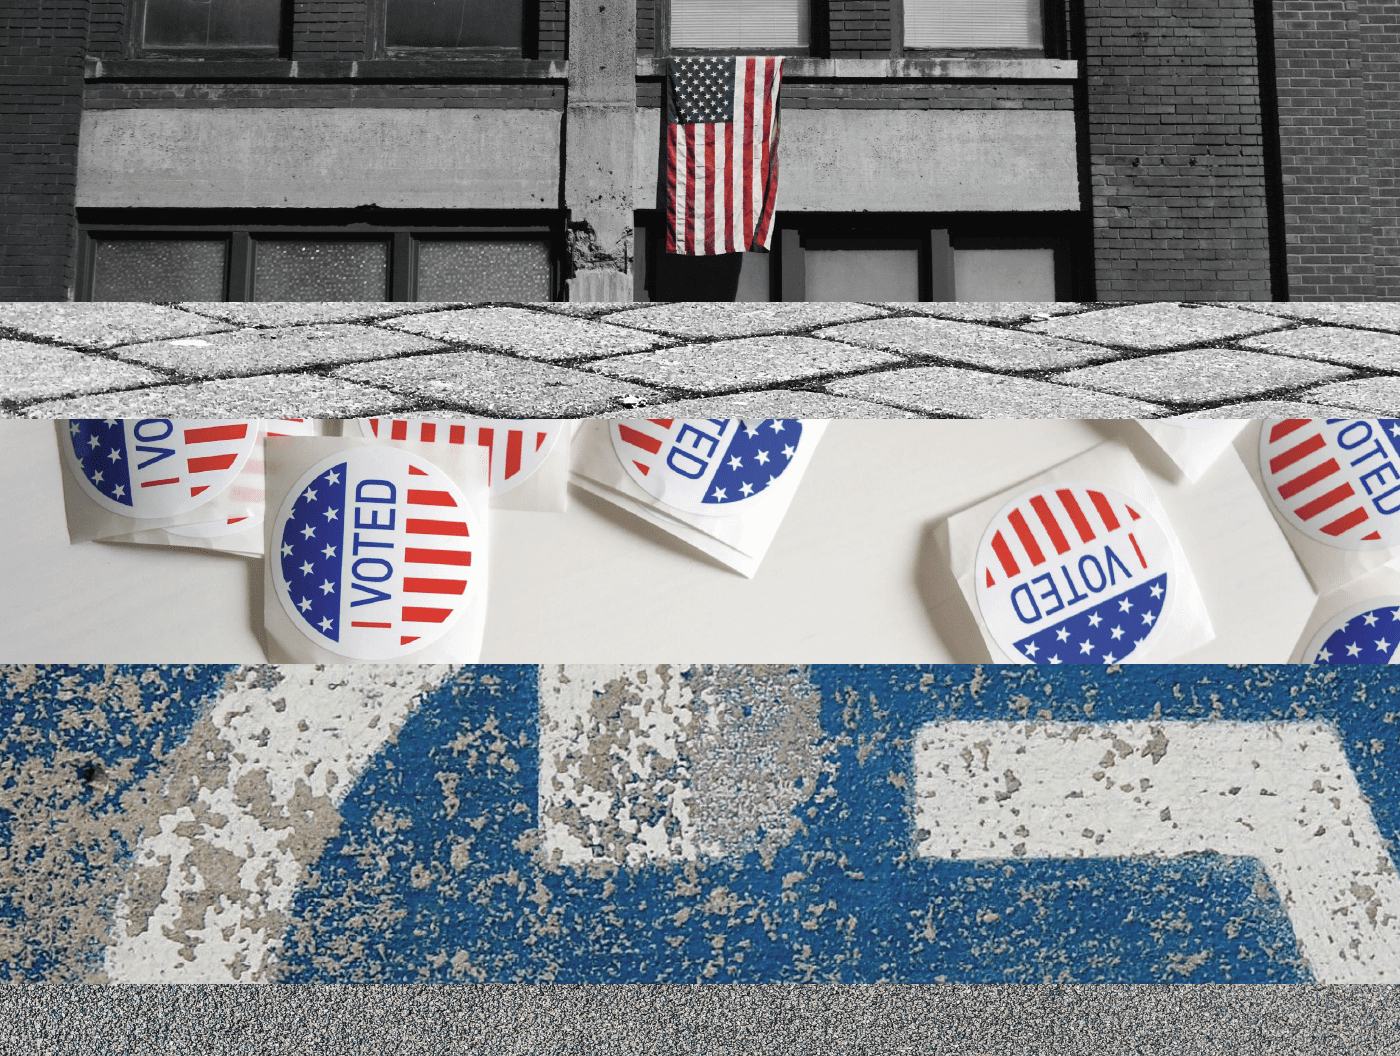 a collage depicting the American flag, “I Voted” stickers and the International Symbol of Access layered between various textures of brick and pavement.